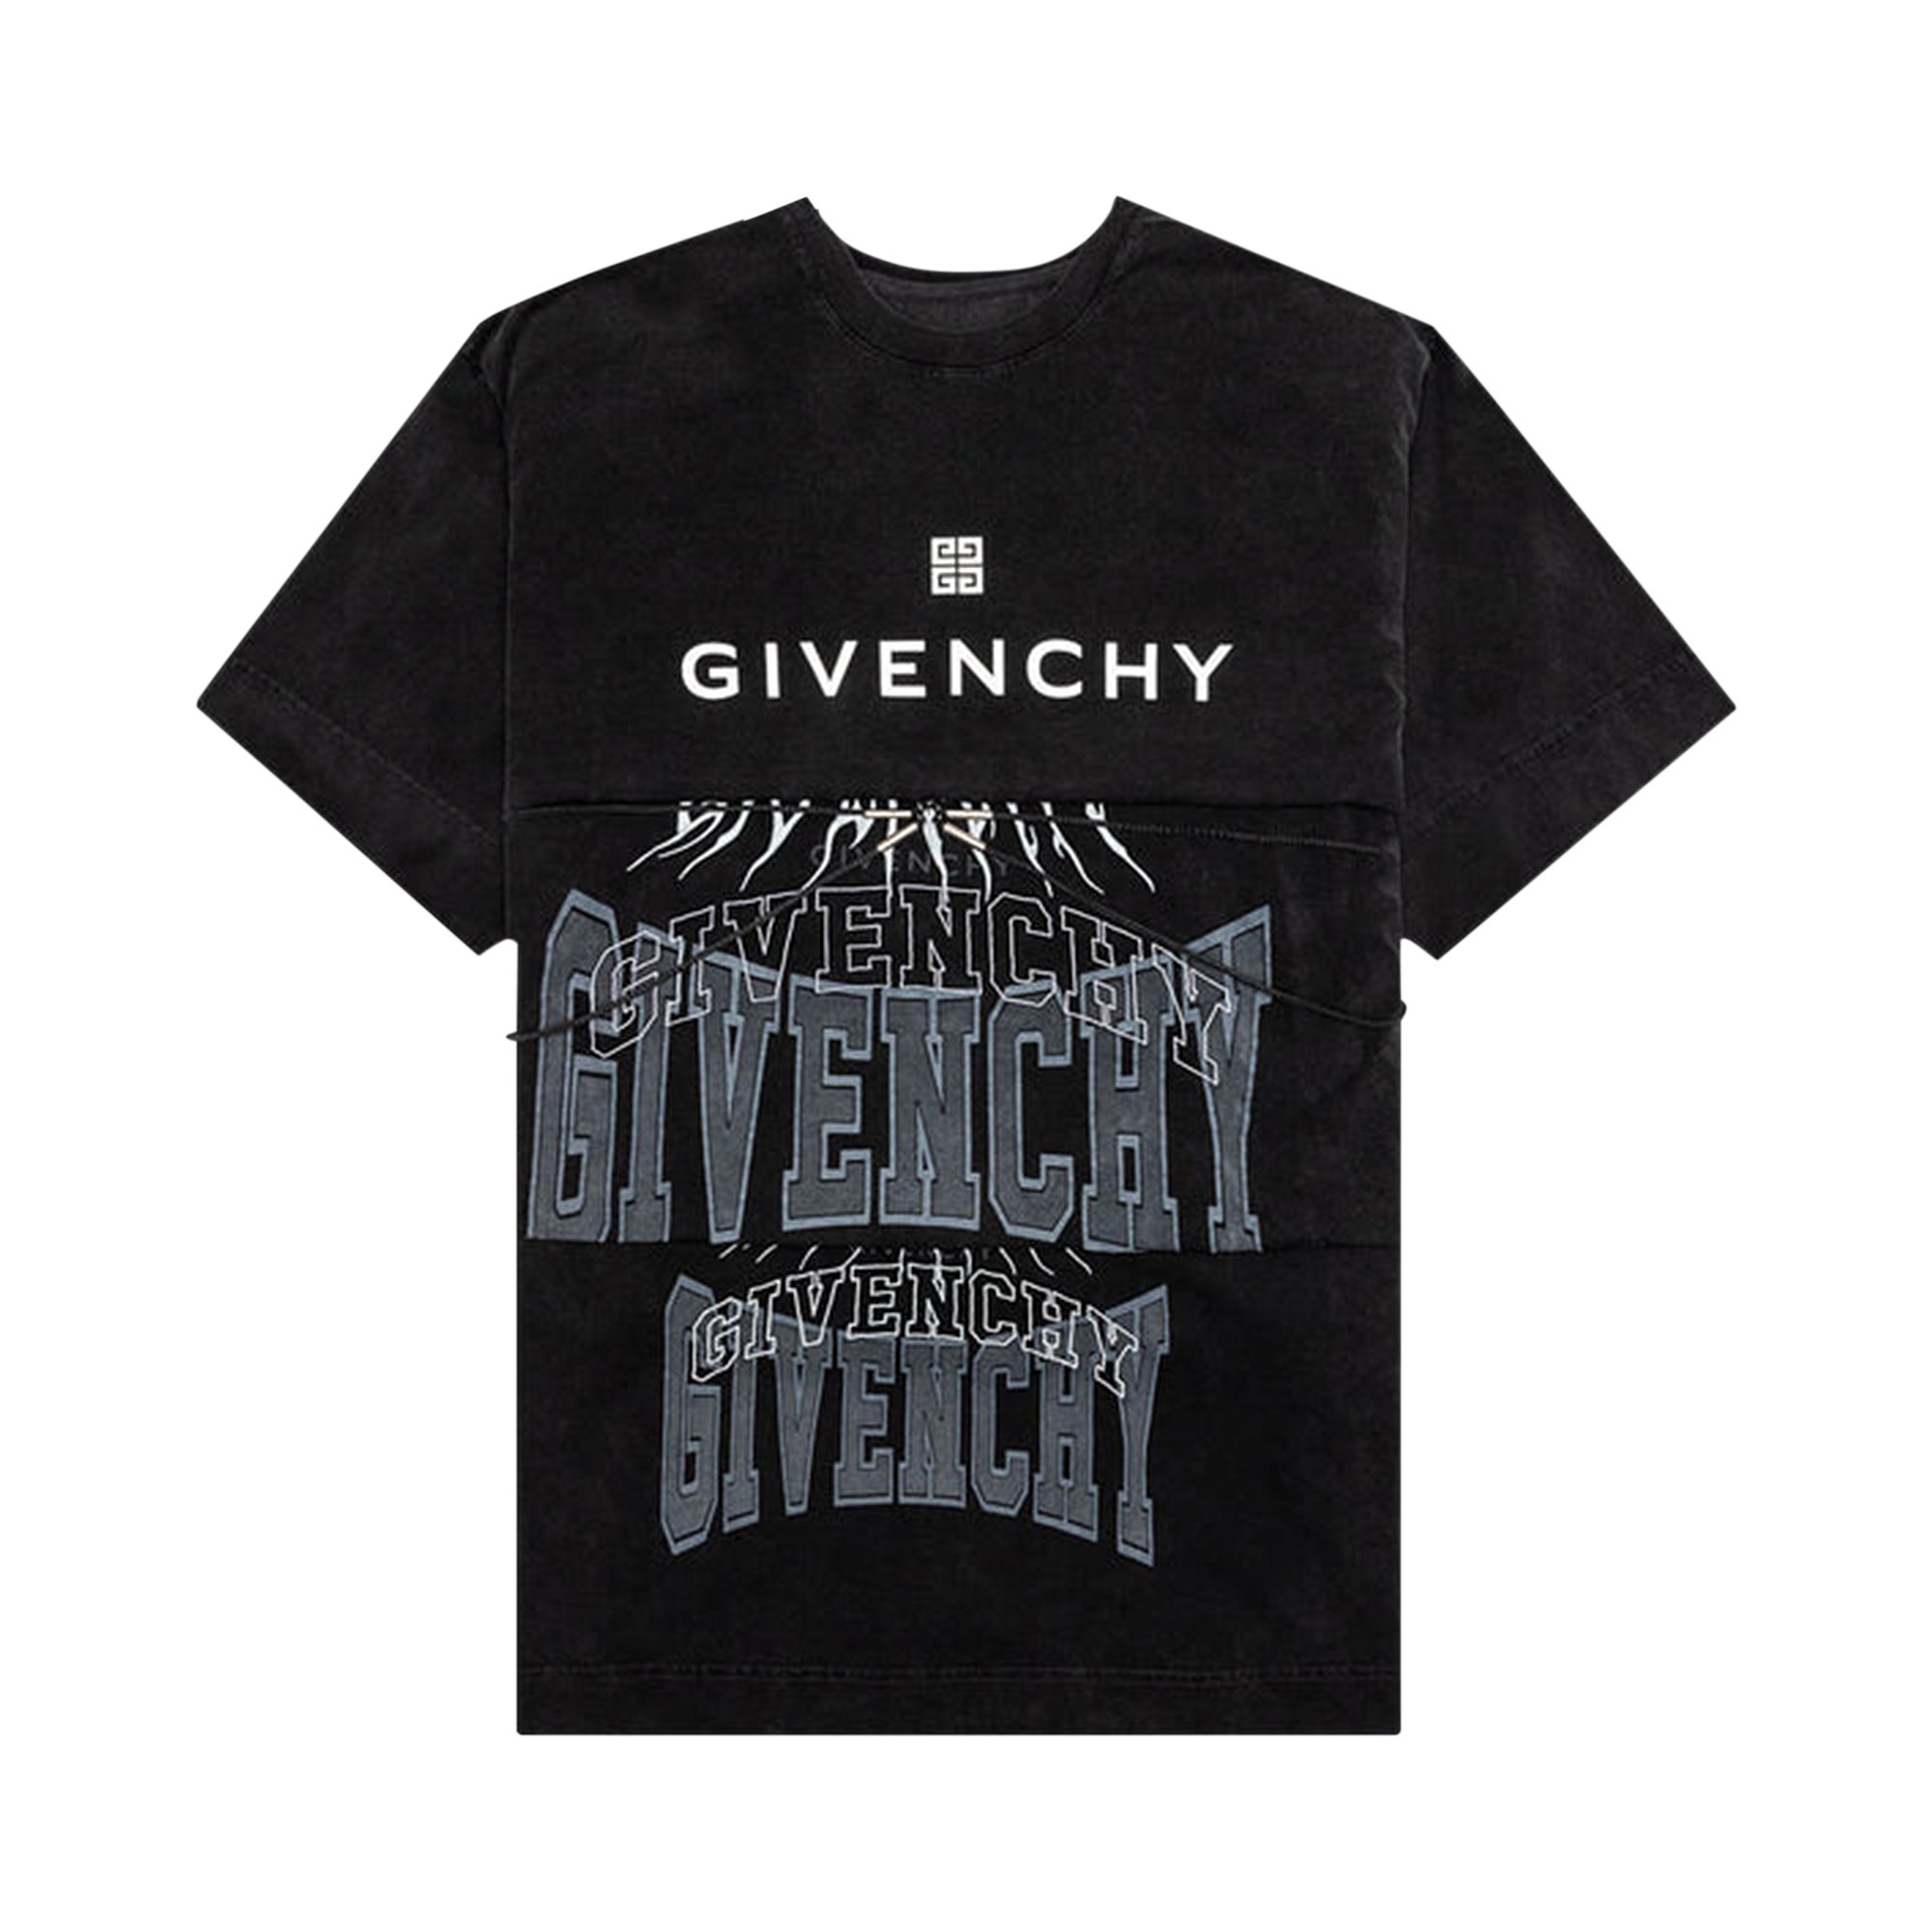 Buy Givenchy All-In-One T-Shirt 'Grey' - BM71FH3Y8T 020 | GOAT